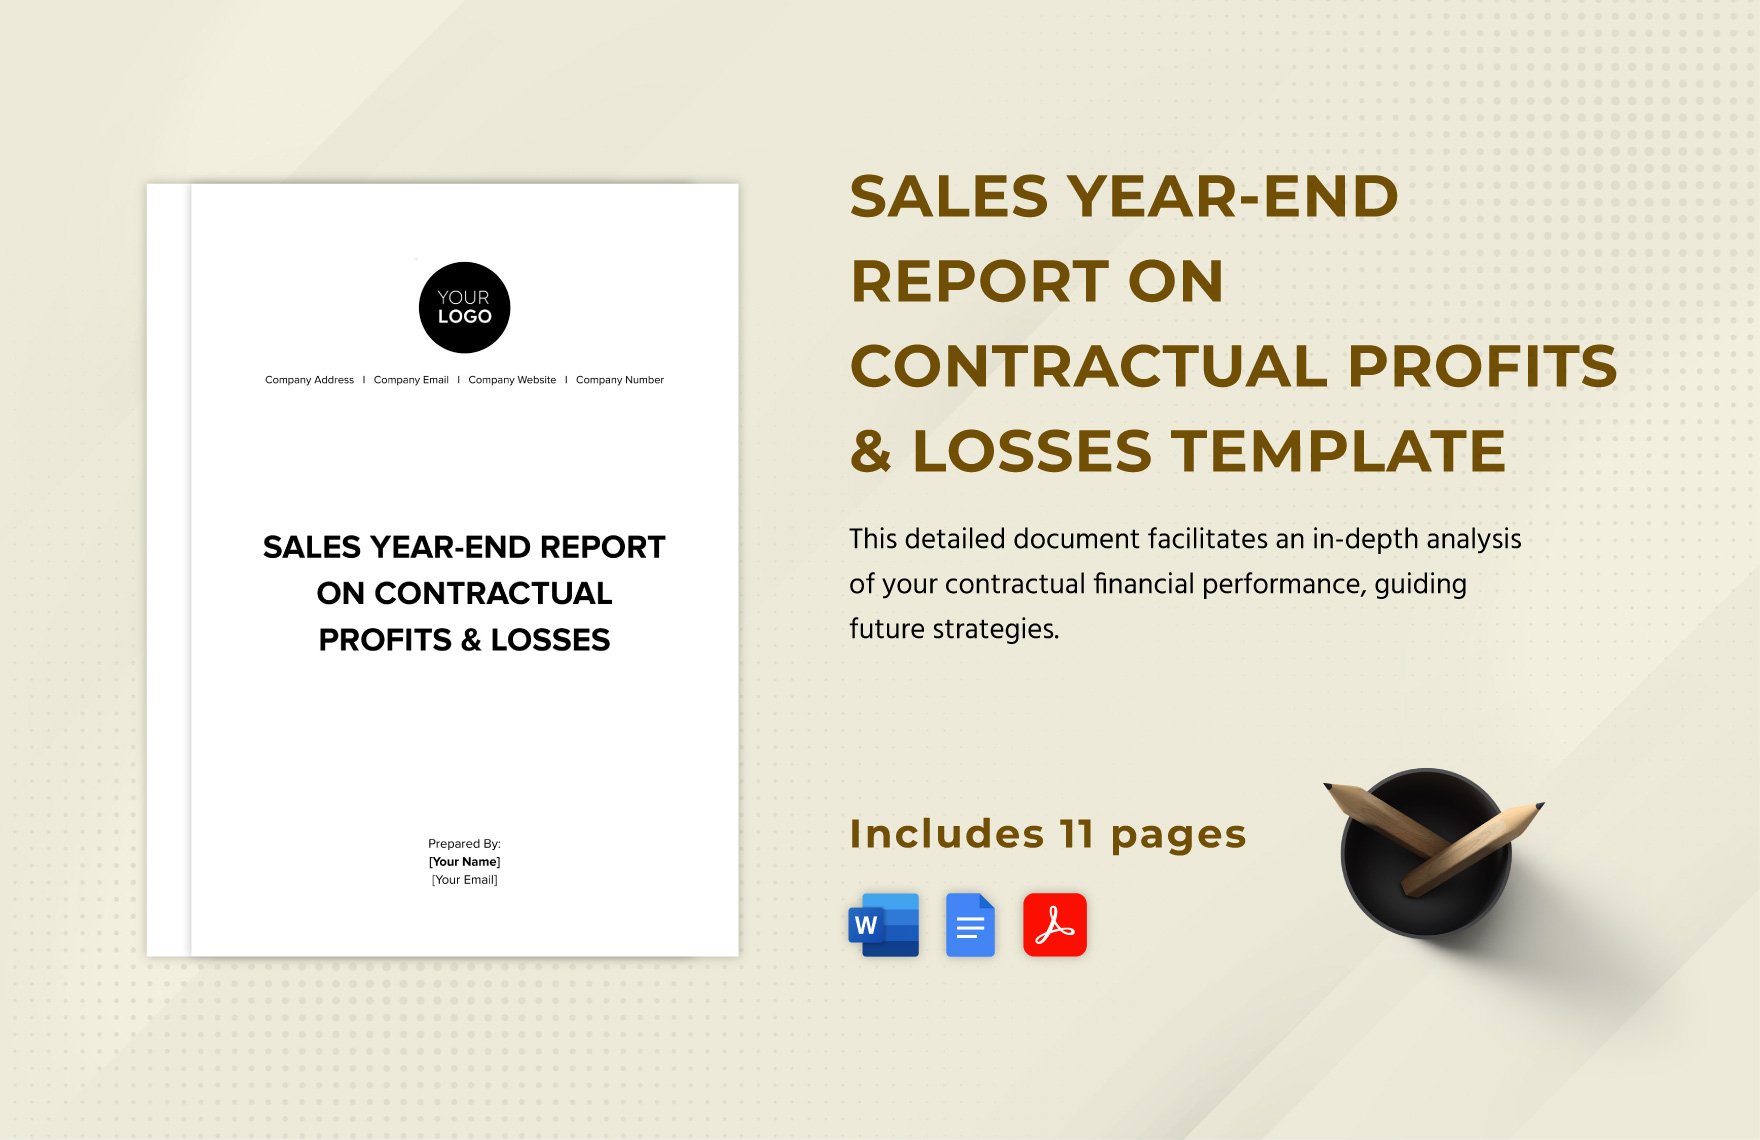 Sales Year-end Report on Contractual Profits & Losses Template